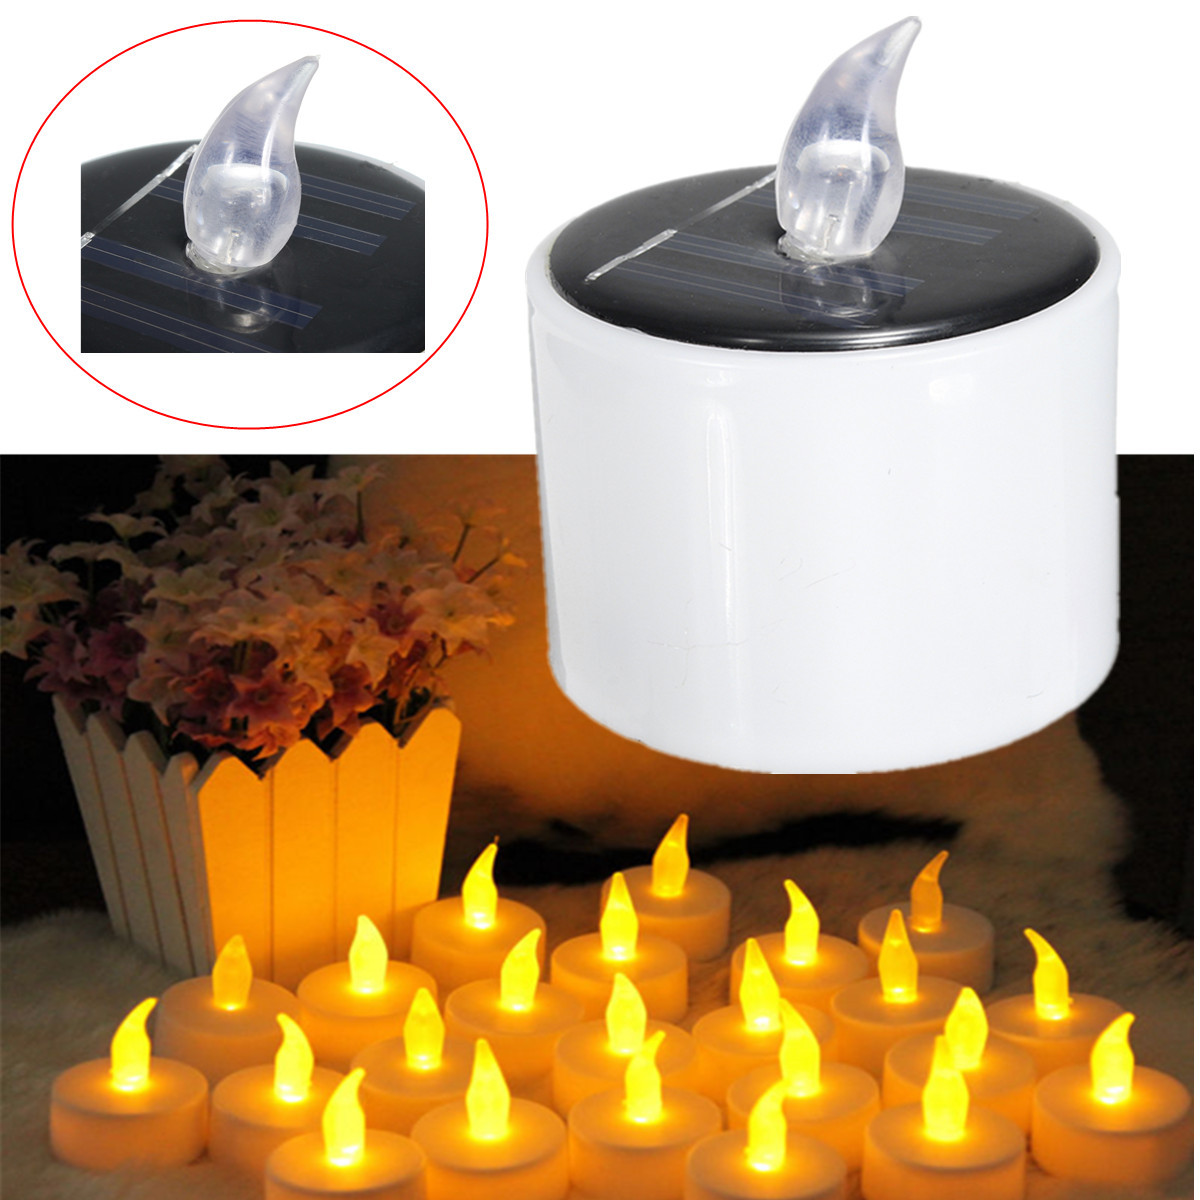 Solar Powered Cylindrical LED Candle Tea Light Home Decor Romantic Yellow Flickering - Warm White